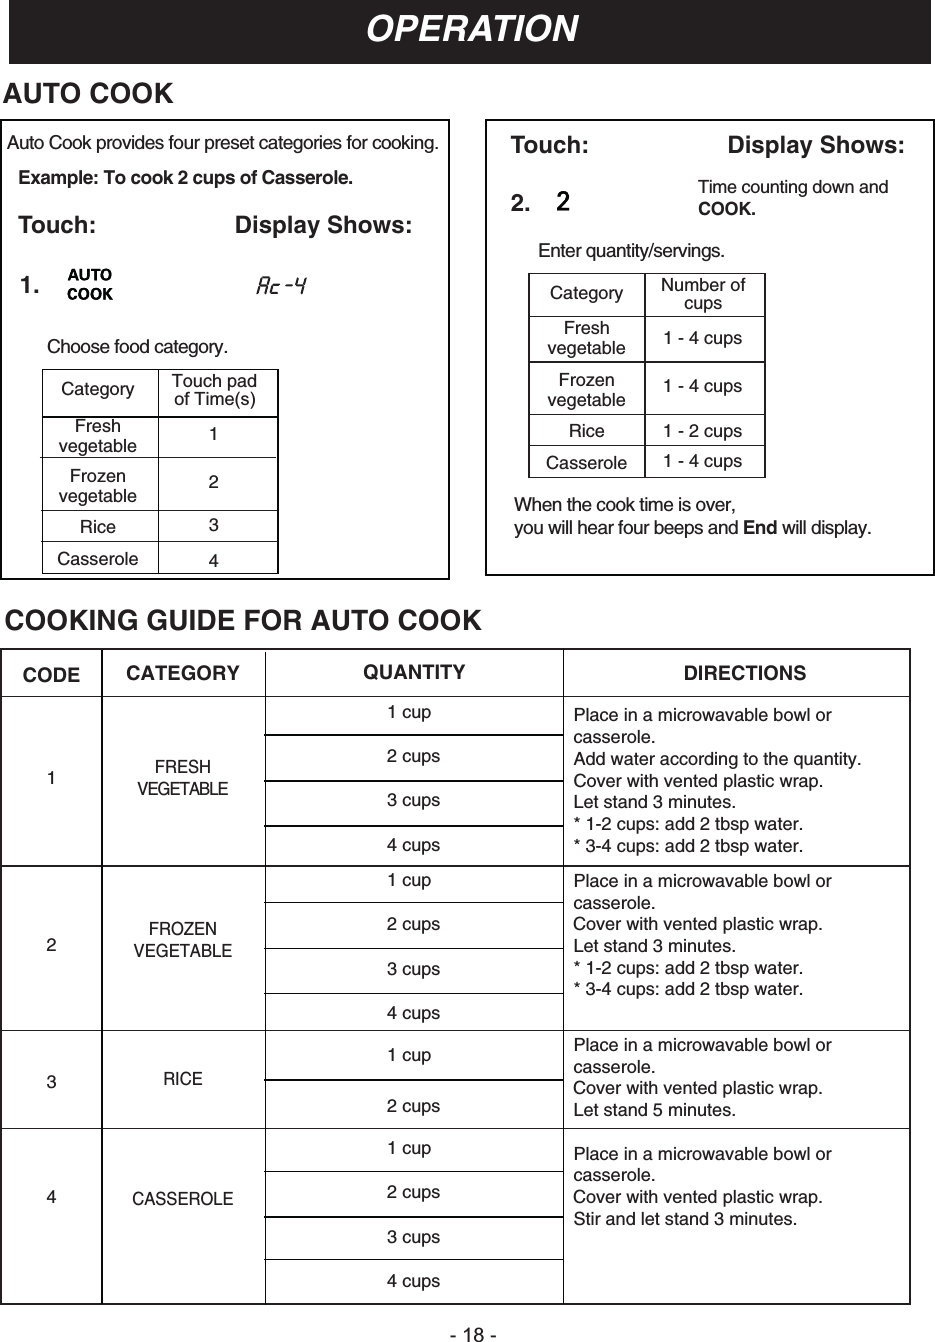 OPERATION- 1 -AUTO COOKAuto Cook provides four preset categories for cooking. Touch: Display Shows:Example: To cook 2 cups of Casserole.Touch: Display Show1.Choose food category.Touch padCategory of Time(s)Freshvegetable 1Frozen 2vegetableRice 3Casserole 4s: 2. Time counting down andCOOK.Enter quantity/servings.When the cook time is over, you will hear four beeps and End will display.Number ofCategory cupsFresh 1 - 4 cupsvegetableFrozen 1 - 4 cupsvegetableRice 1 - 2 cupsCasserole 1 - 4 cupsCOOKING GUIDE FOR AUTO COOKCODE CATEGORY QUANTITYDIRECTIONS1 cup Place in a microwavable bowl orcasserole. 2 cups Add water according to the quantity. FRESH1VEGETABLE3 cups Let stand 3 minutes.* 1-2 cups: add 2 tbsp water.4 cups * 3-4 cups: add 2 tbsp water.1 cup Place in a microwavable bowl orcasserole. FROZEN2 cups2VEGETABLELet stand 3 minutes.3 cups * 1-2 cups: add 2 tbsp water.* 3-4 cups: add 2 tbsp water.4 cupsPlace in a microwavable bowl or1 cup casserole. 3RICE2 cups Let stand 5 minutes.1 cup Place in a microwavable bowl orcasserole. 42 cupsCASSEROLEStir and let stand 3 minutes.3 cups4 cupsCover with vented plastic wrap. Cover with vented plastic wrap. Cover with vented plastic wrap. Cover with vented plastic wrap. 